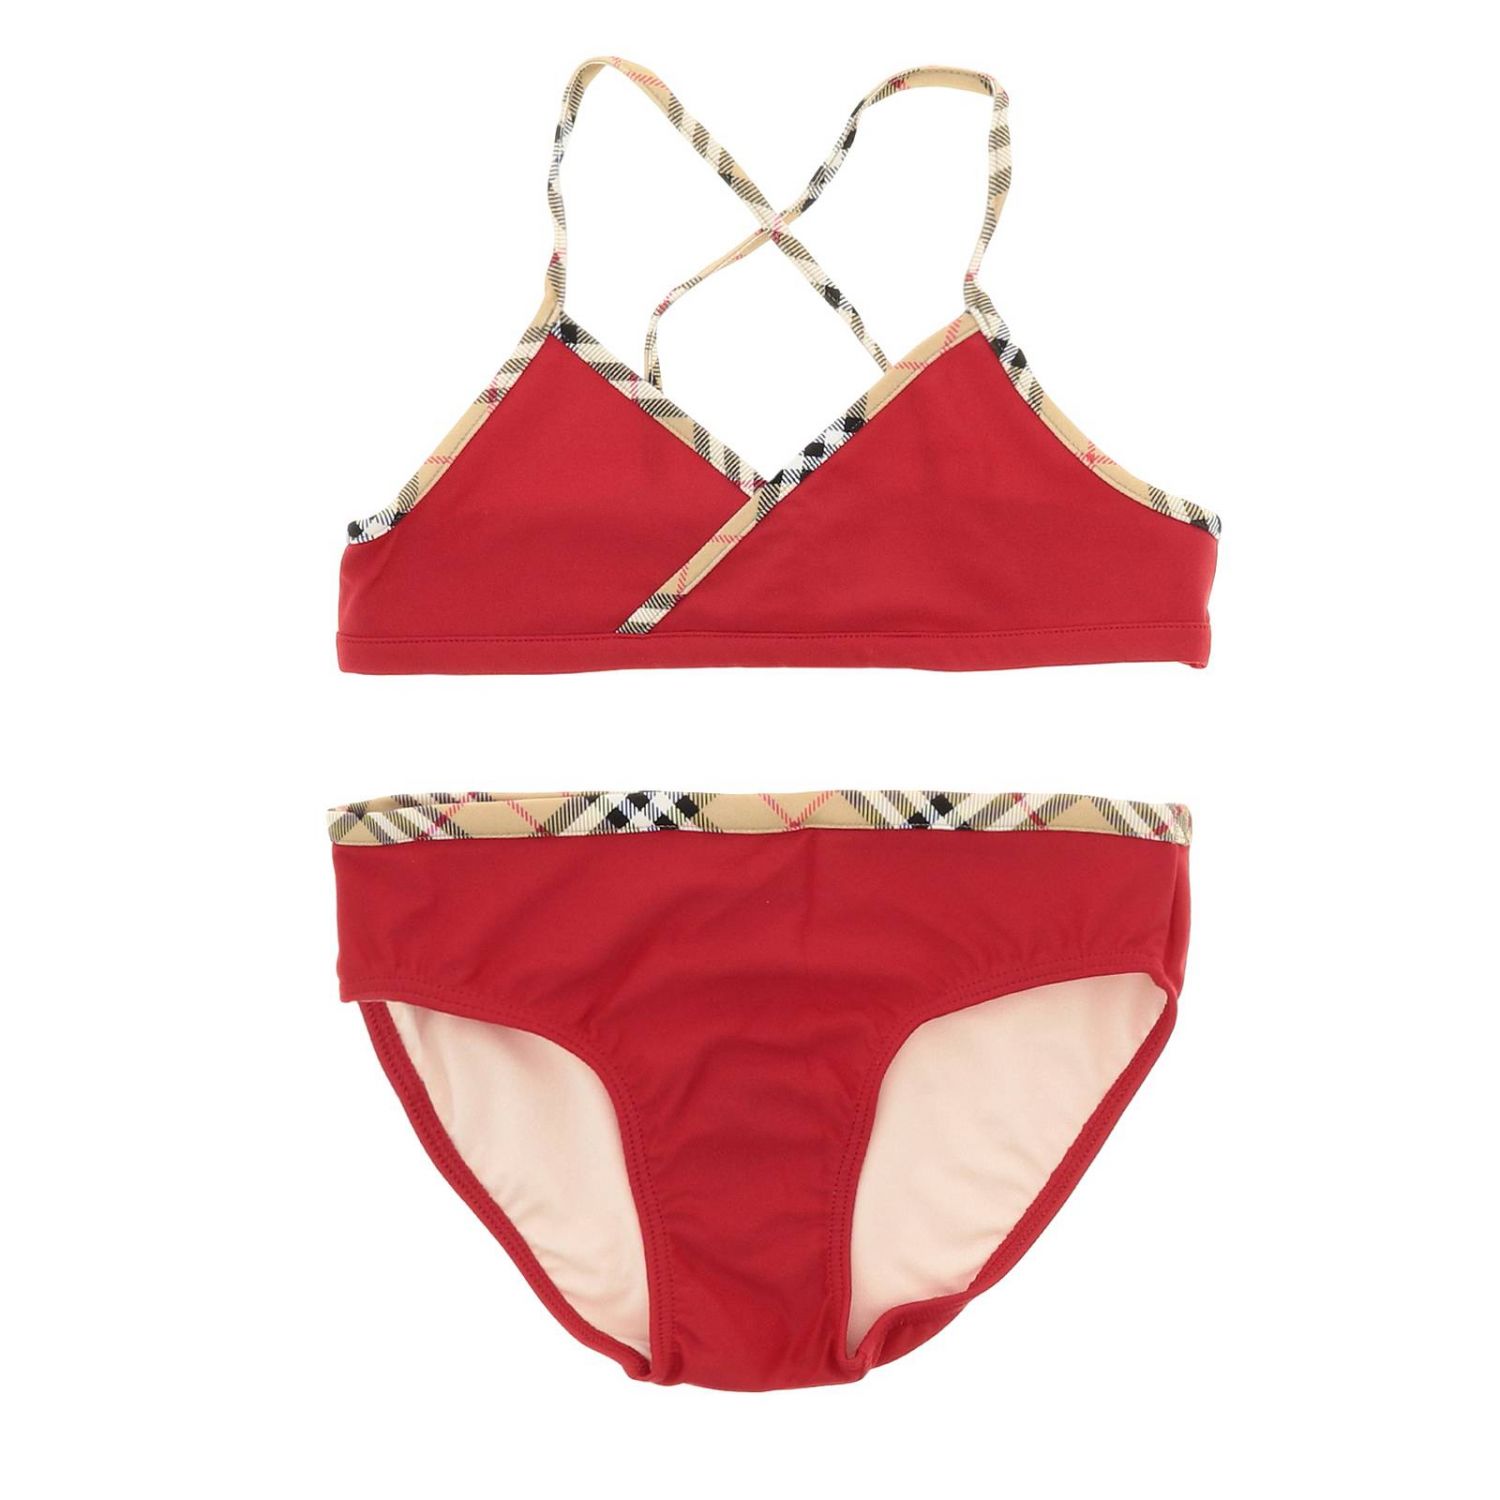 burberry swimsuit for kids